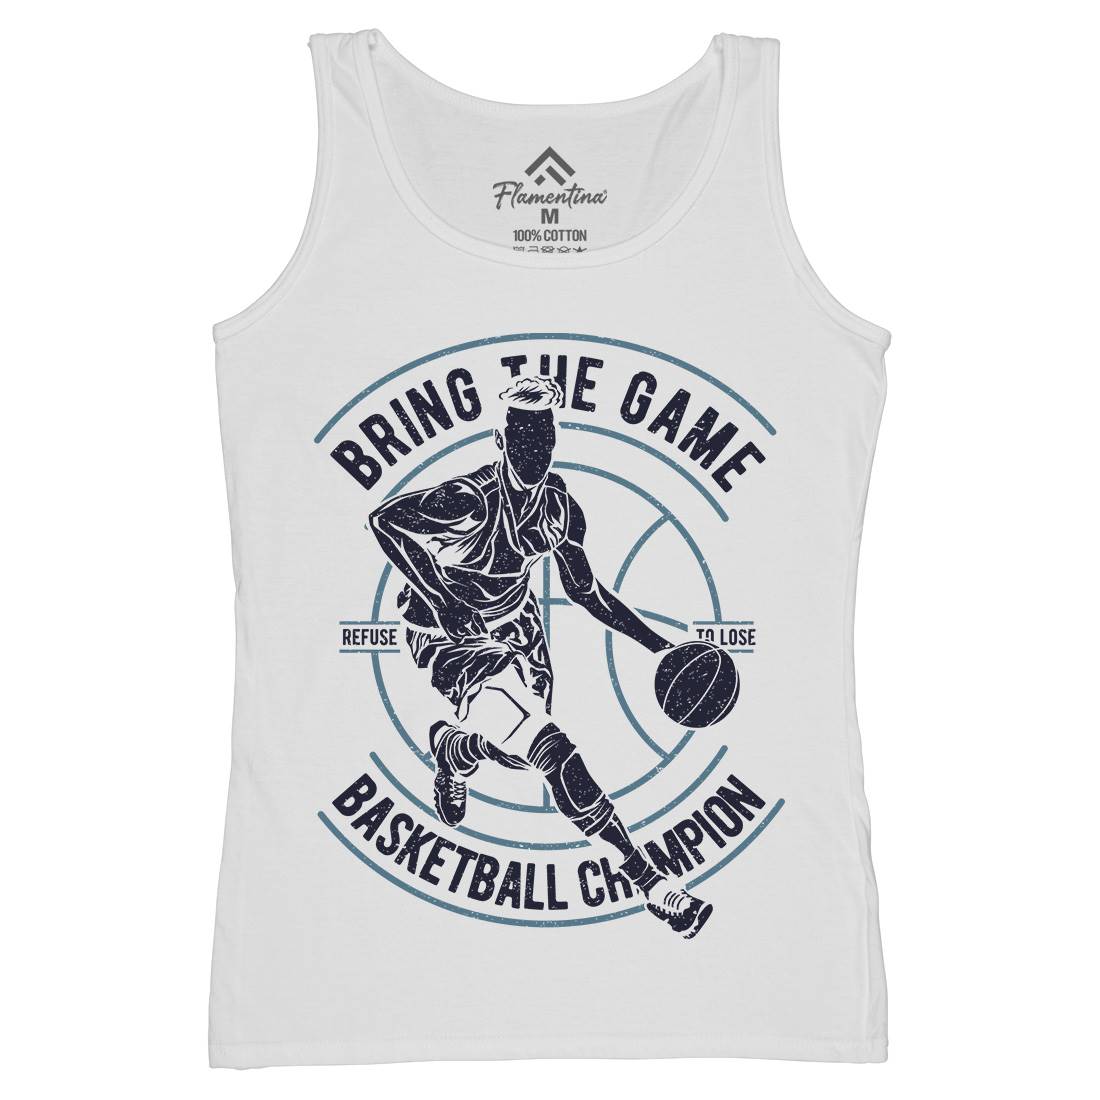 Bring The Game Womens Organic Tank Top Vest Sport A627